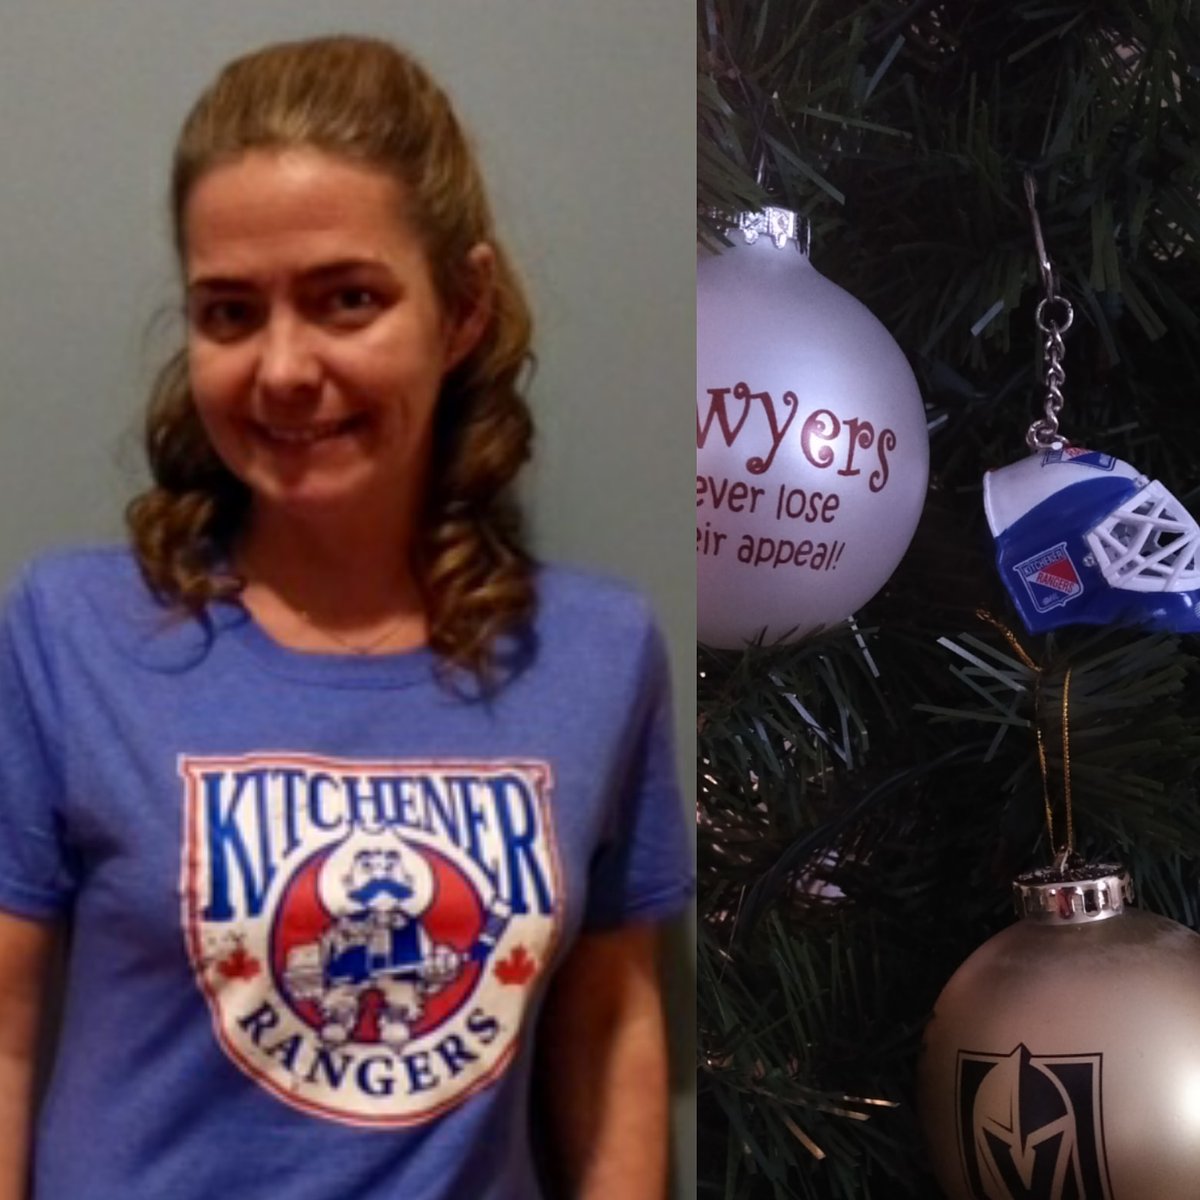 The @ohlrangers #teddybeartoss game is my favourite but I am loving my #retro #1995 #tshirt as a #2020 substitute and my new #treeornament @rangersreachwr #clarkyskids #rtown #kwawesome